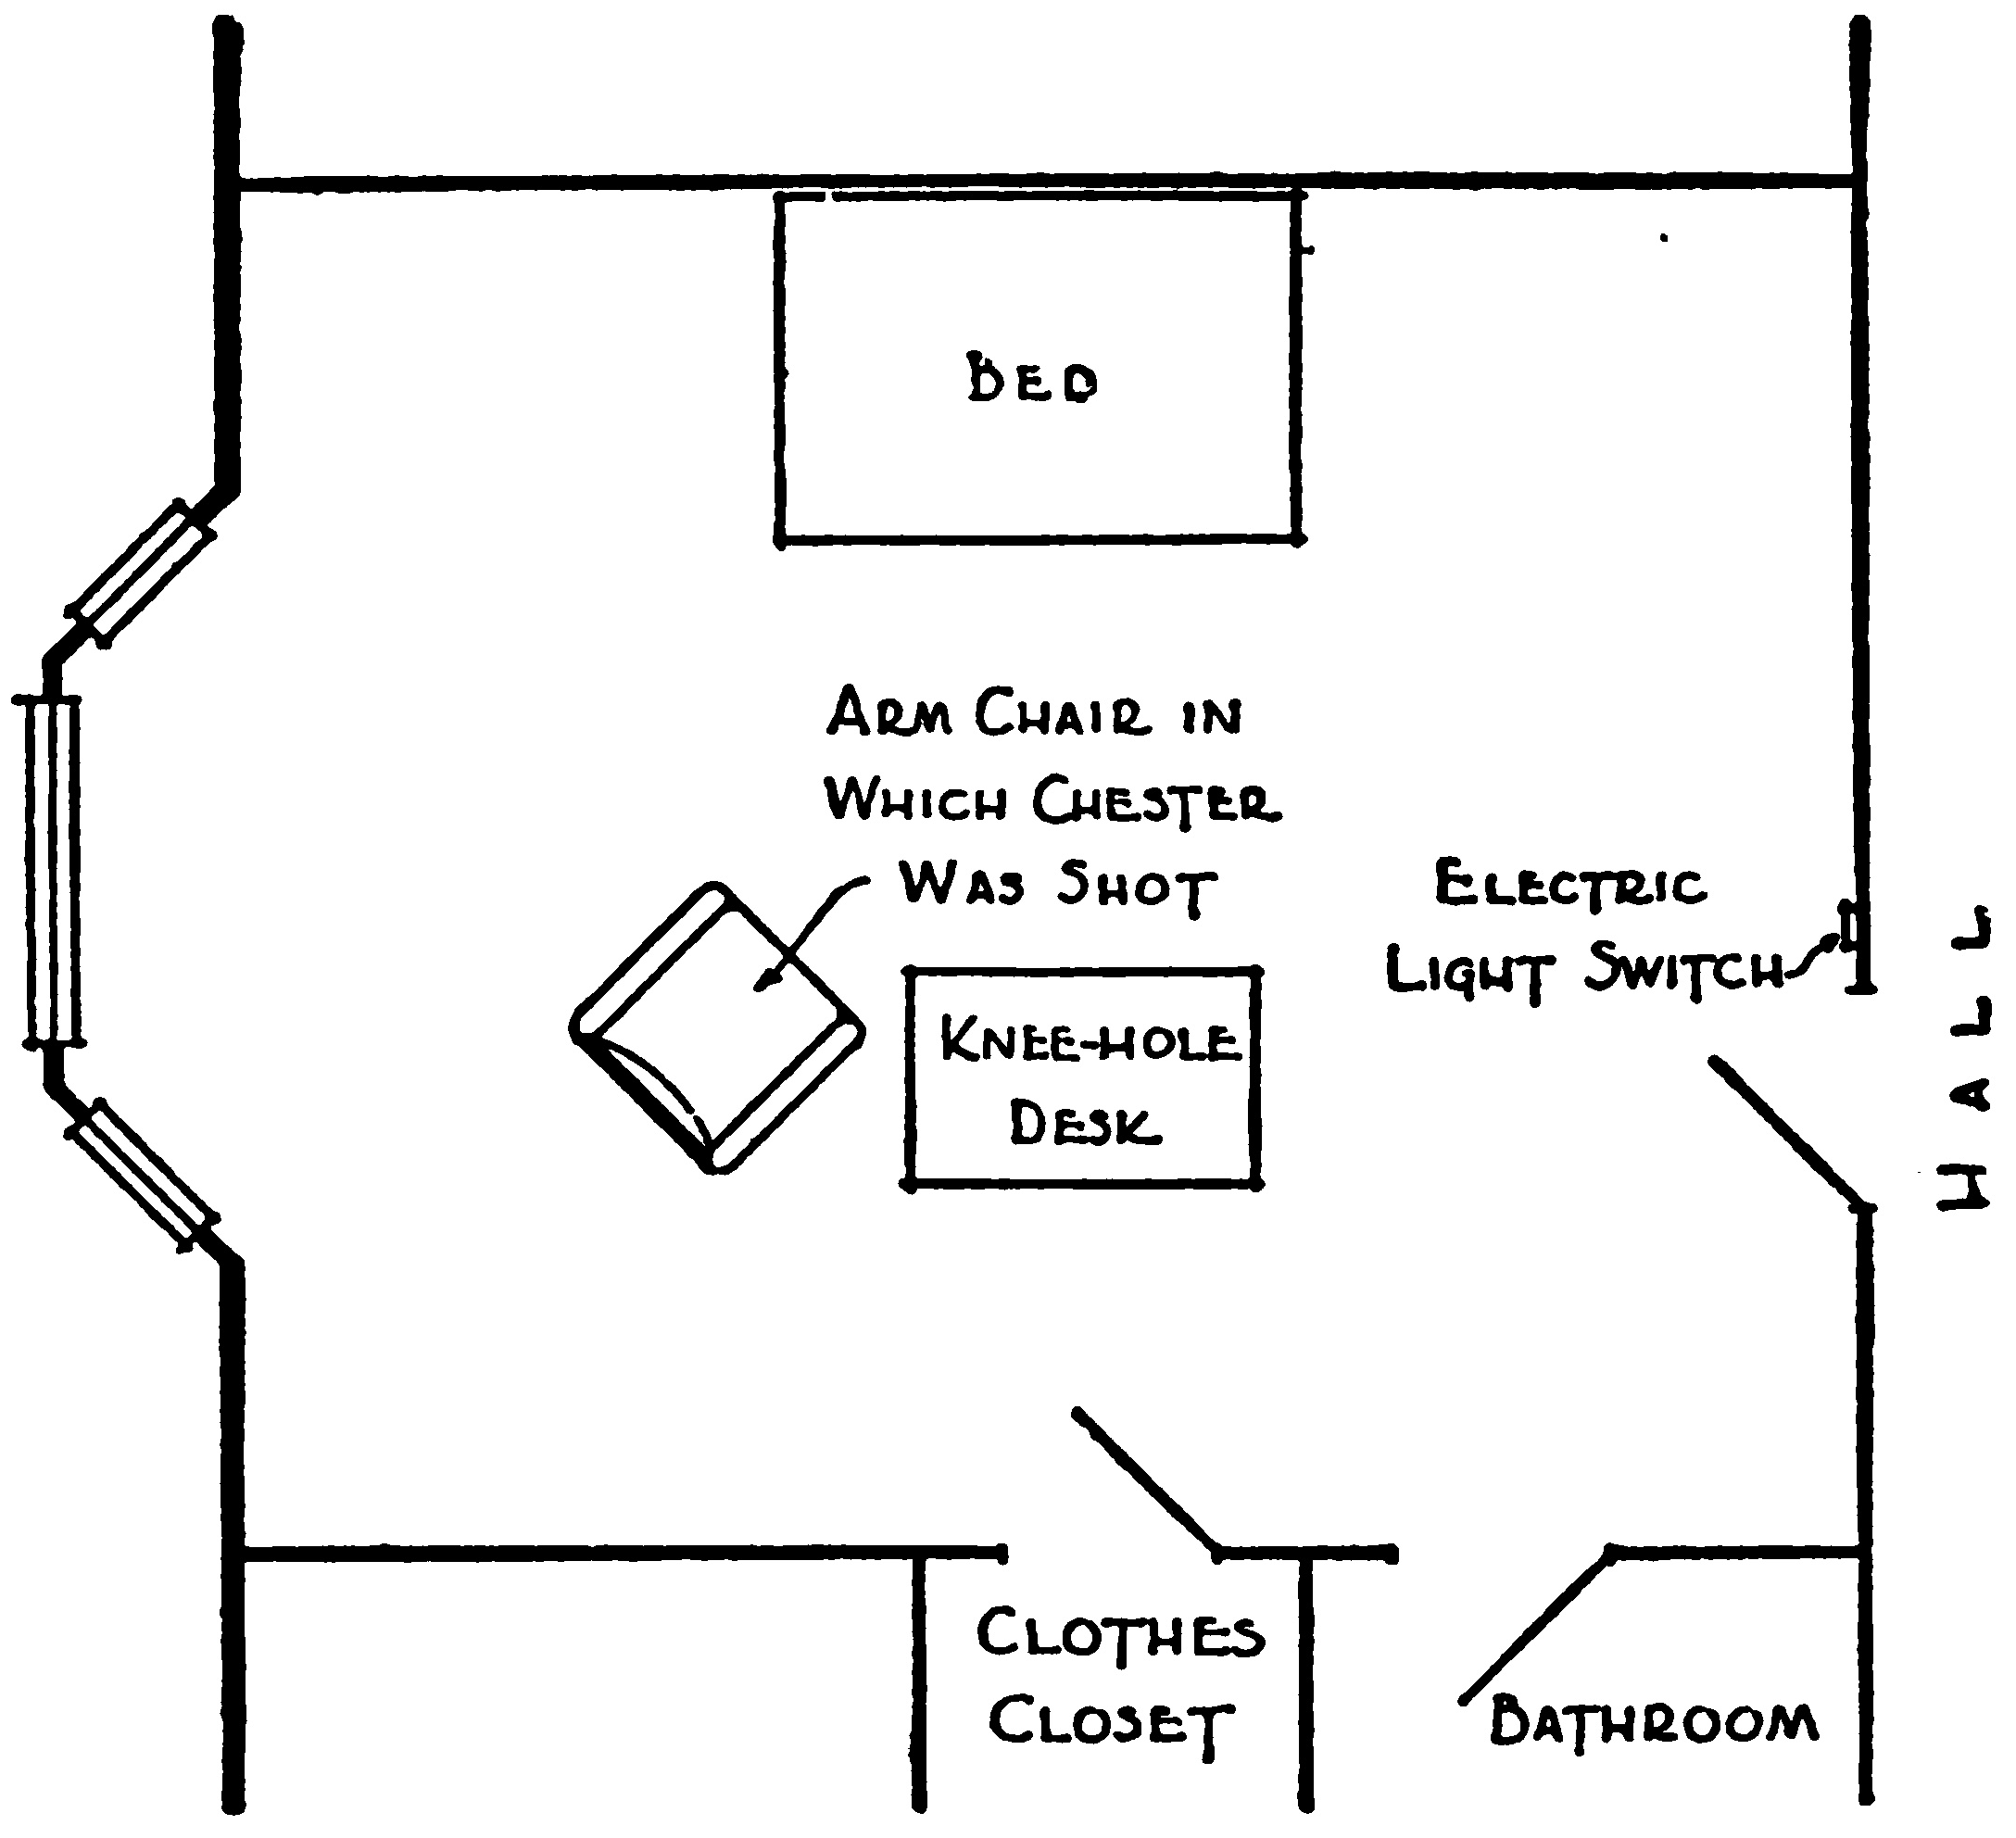 A plan of a bedroom. In the     center of the room is a knee-hole desk and a chair labelled     “arm chair in which Chester was shot.” The bed is against one     wall, and on the opposite wall are doors leading to a closet and     a bathroom.